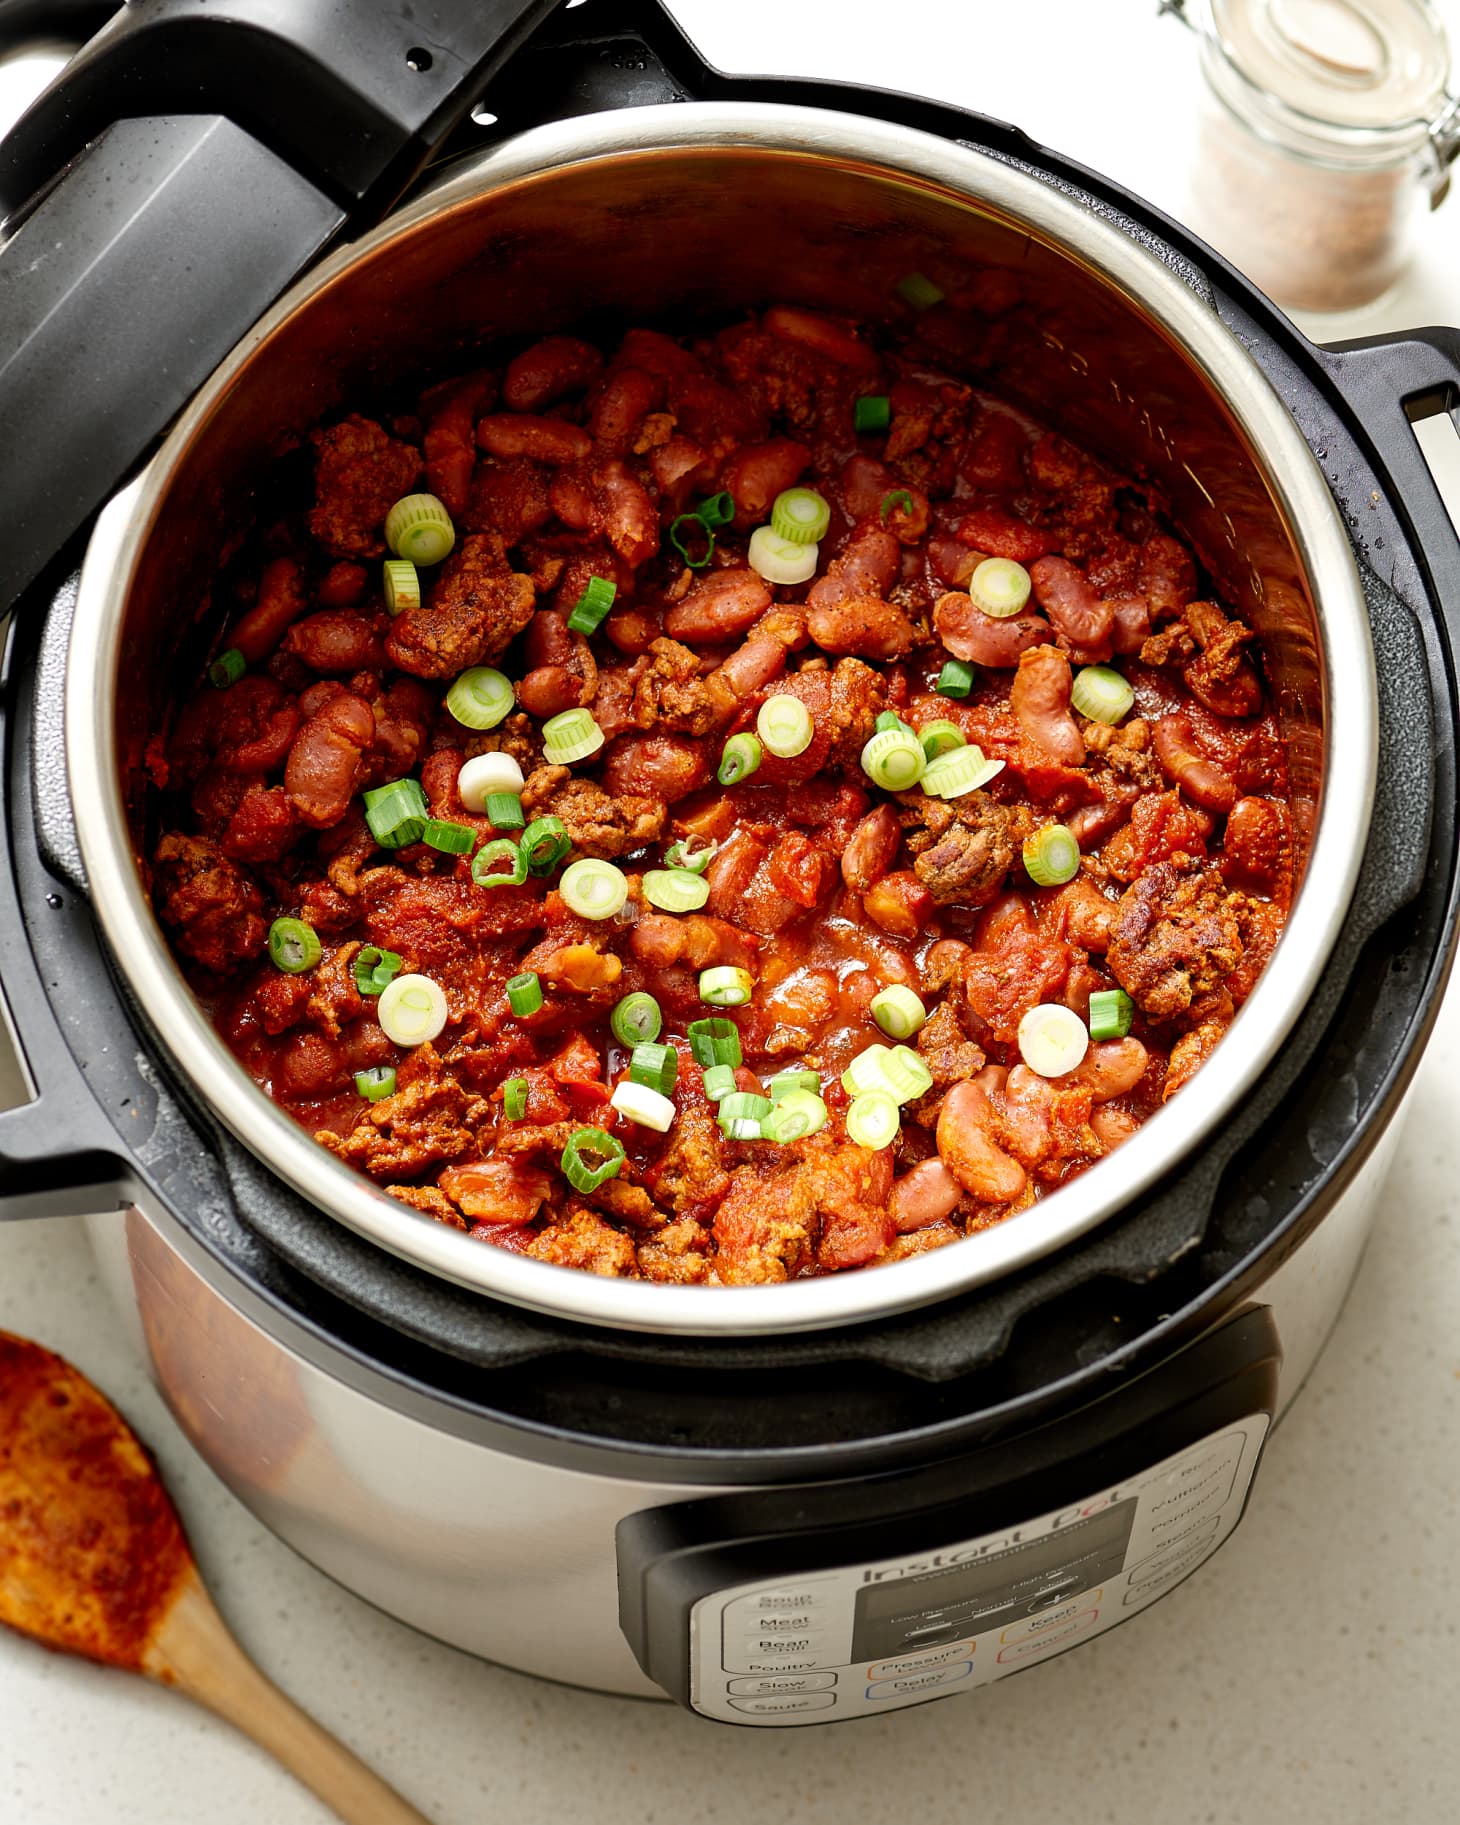 How To Make Easy Instant Pot Chili in 1 Hour | Kitchn